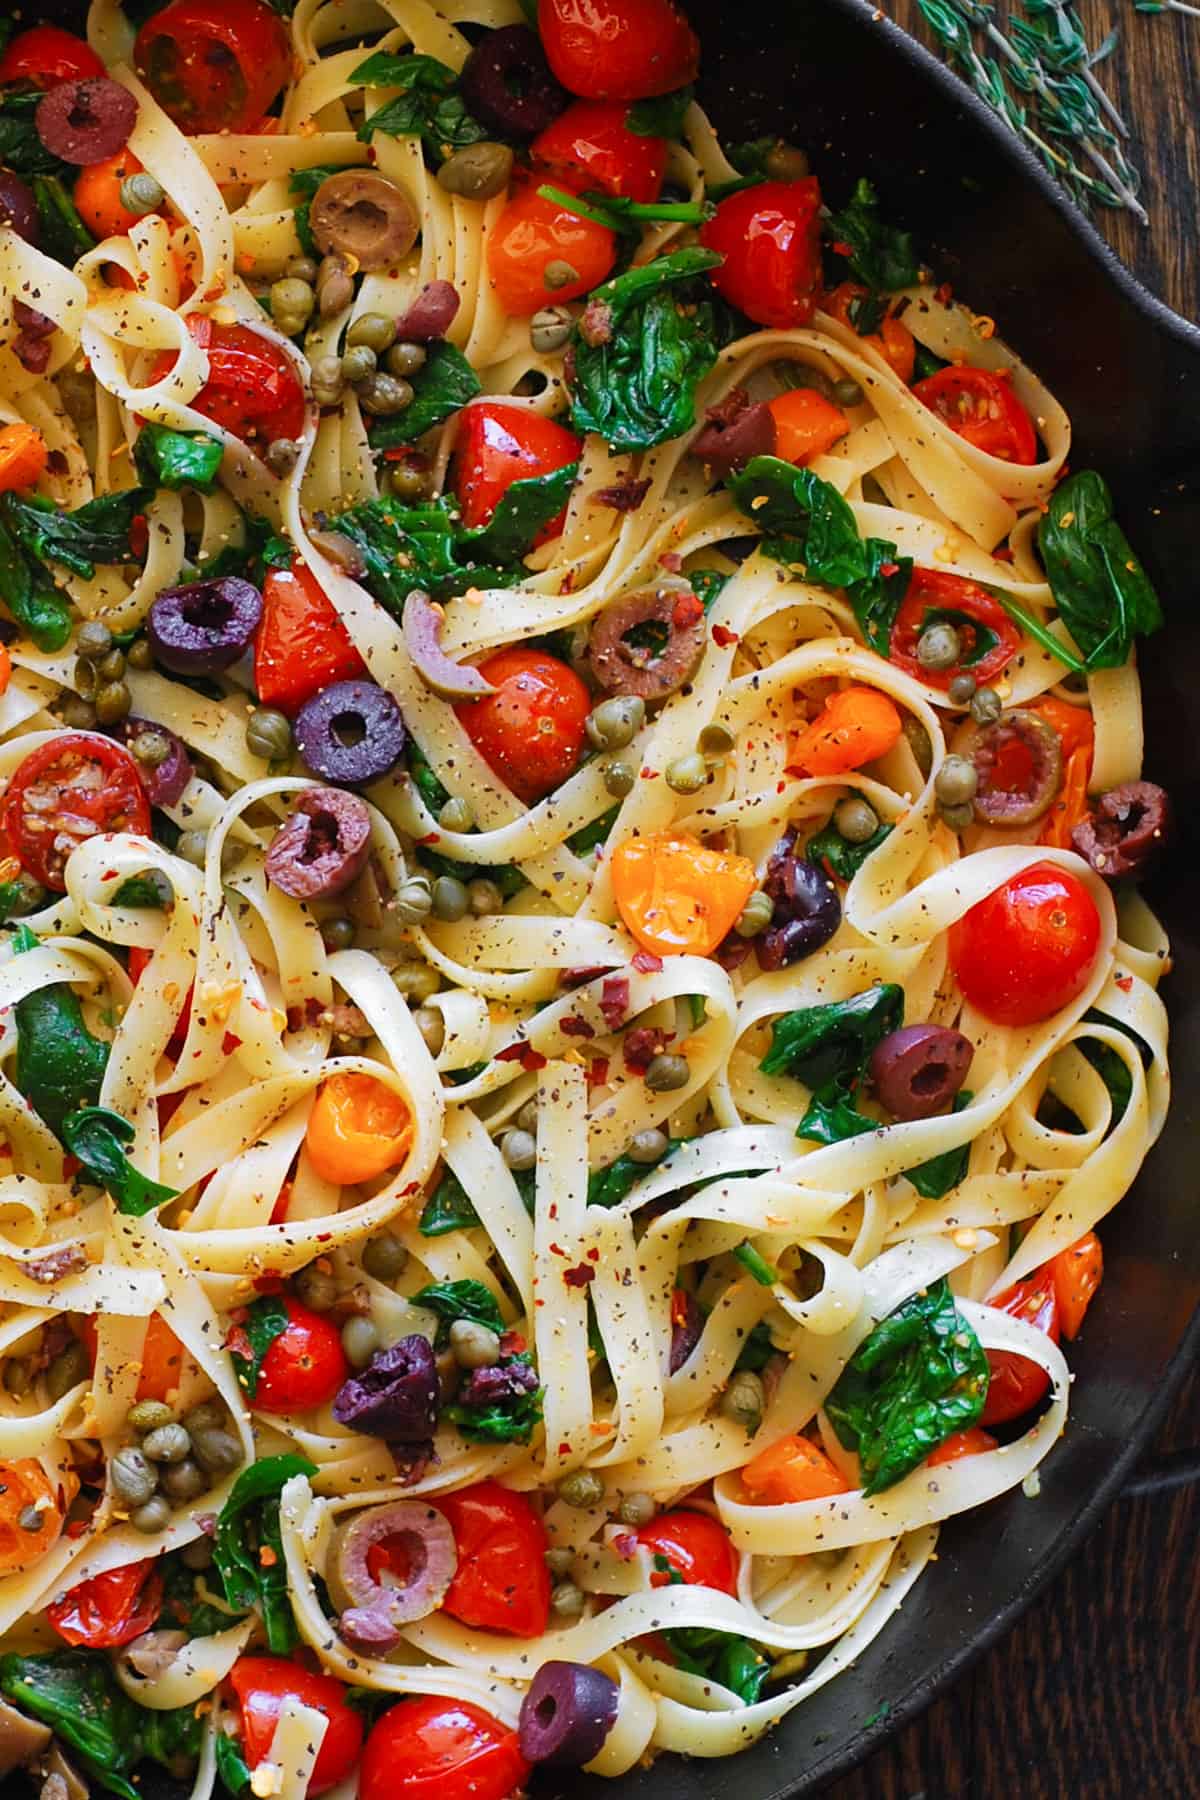 tomato spinach fettuccine pasta with olives, capers - in a cast iron skillet.